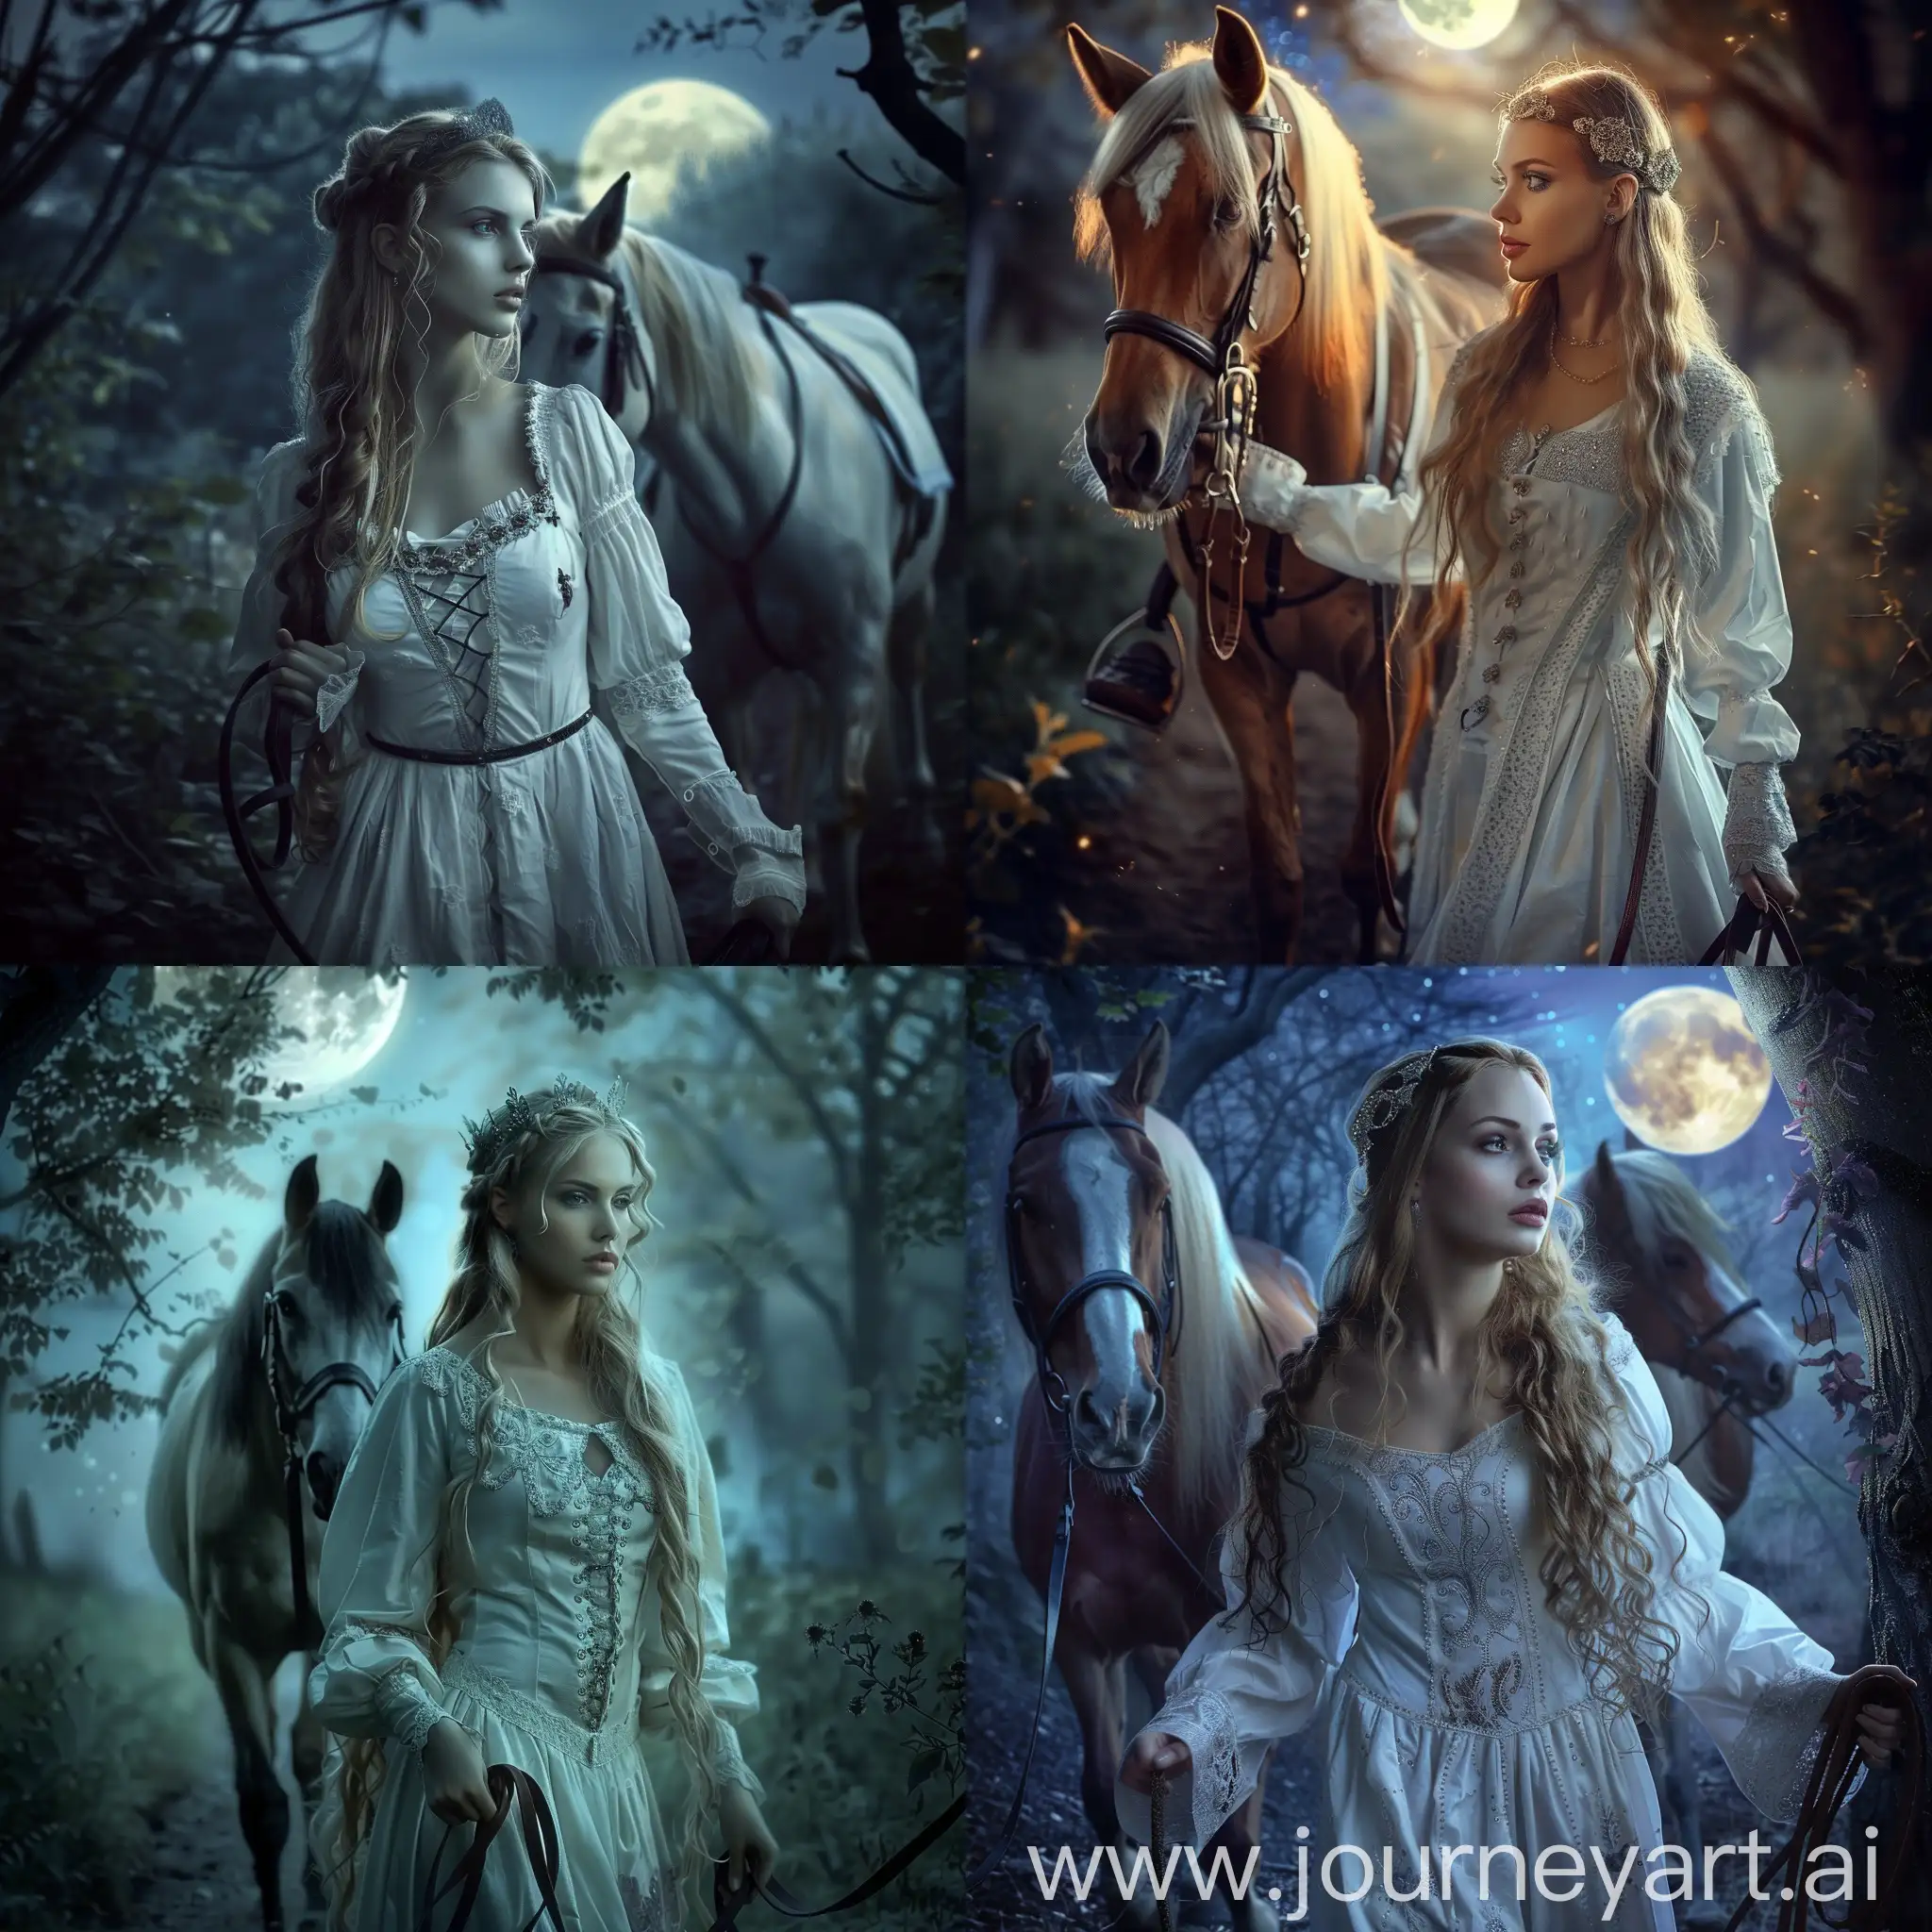 A beautiful medieval woman with delicate  facial features and very long blonde hair and wearing a white medieval dress leading to a horse through a magical moonlit forest